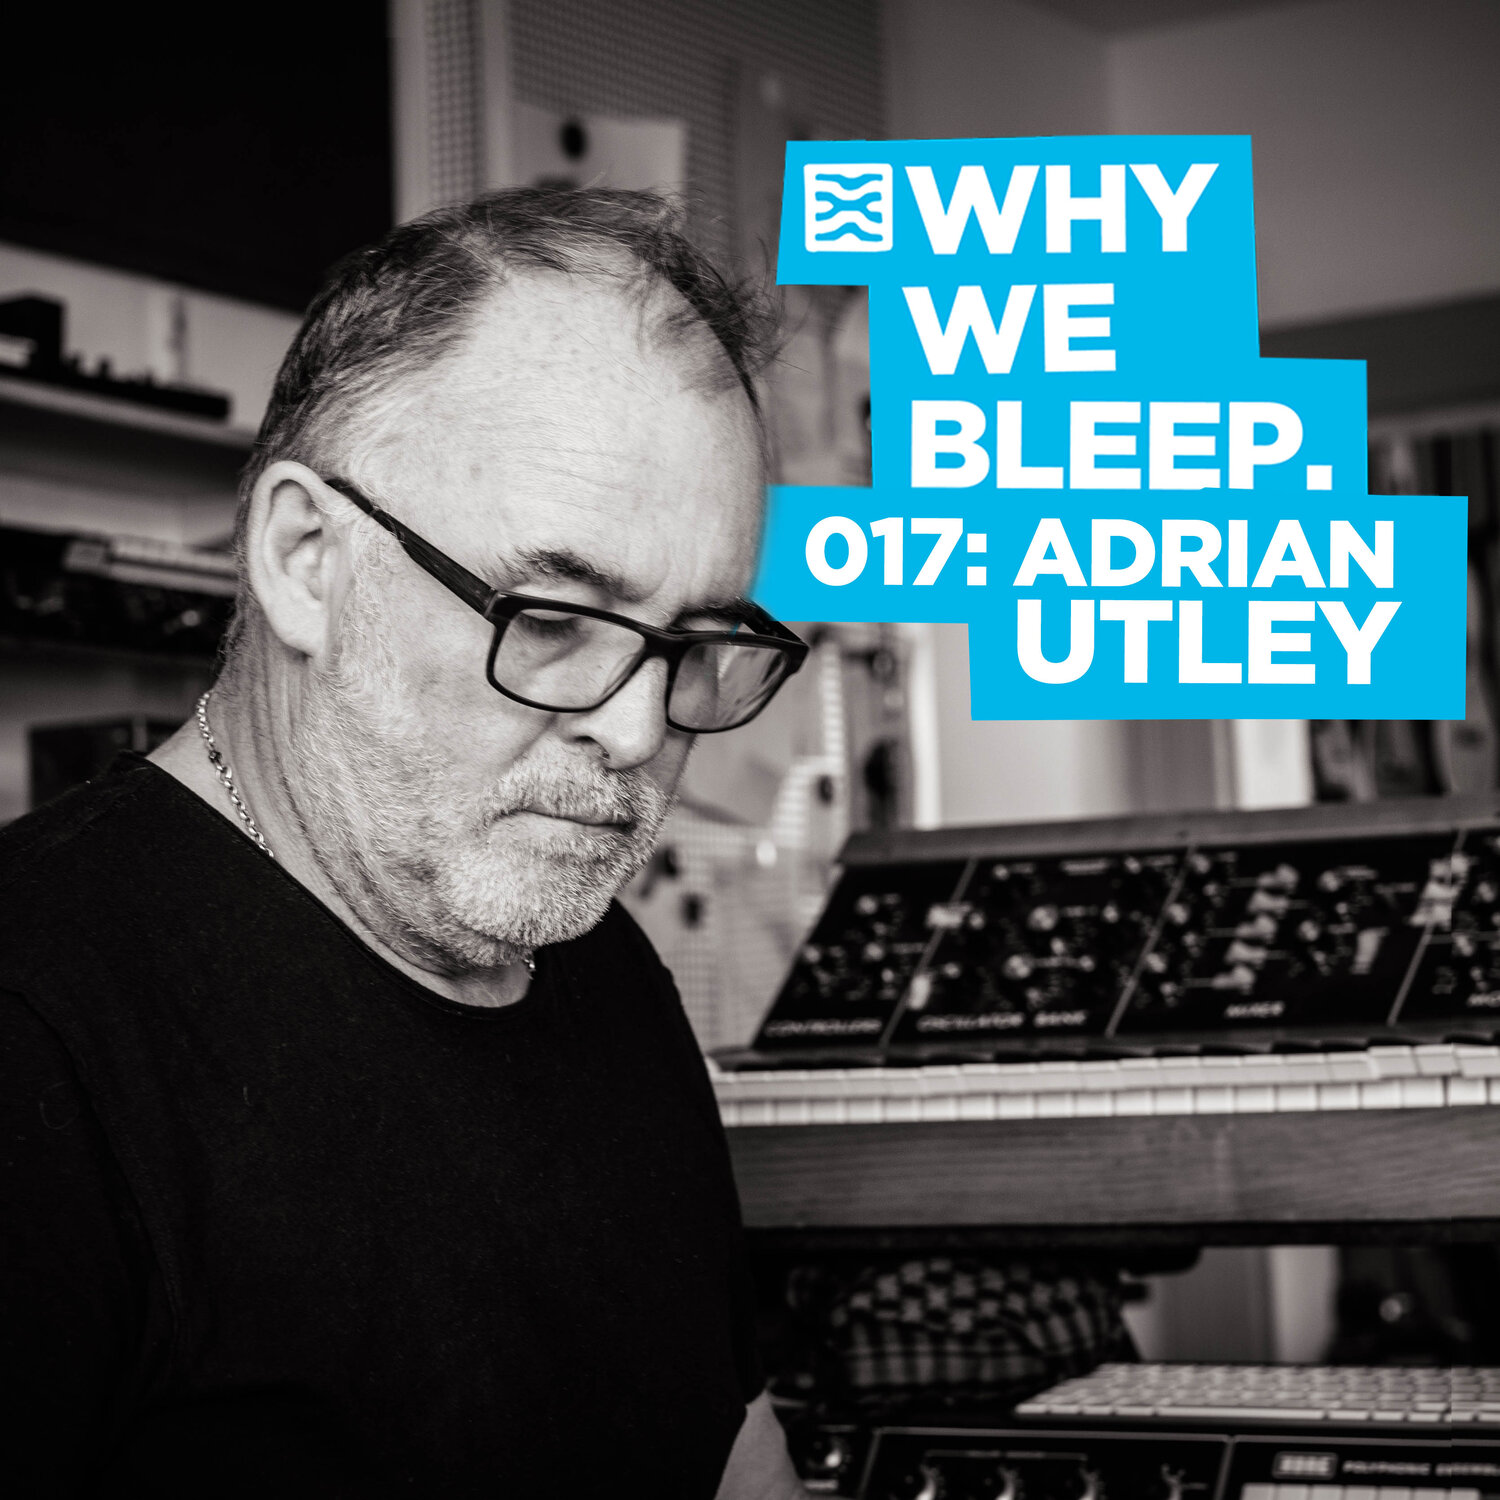 WHY WE BLEEP 017: ADRIAN UTLEY – Why We Bleep – Podcast – Podtail